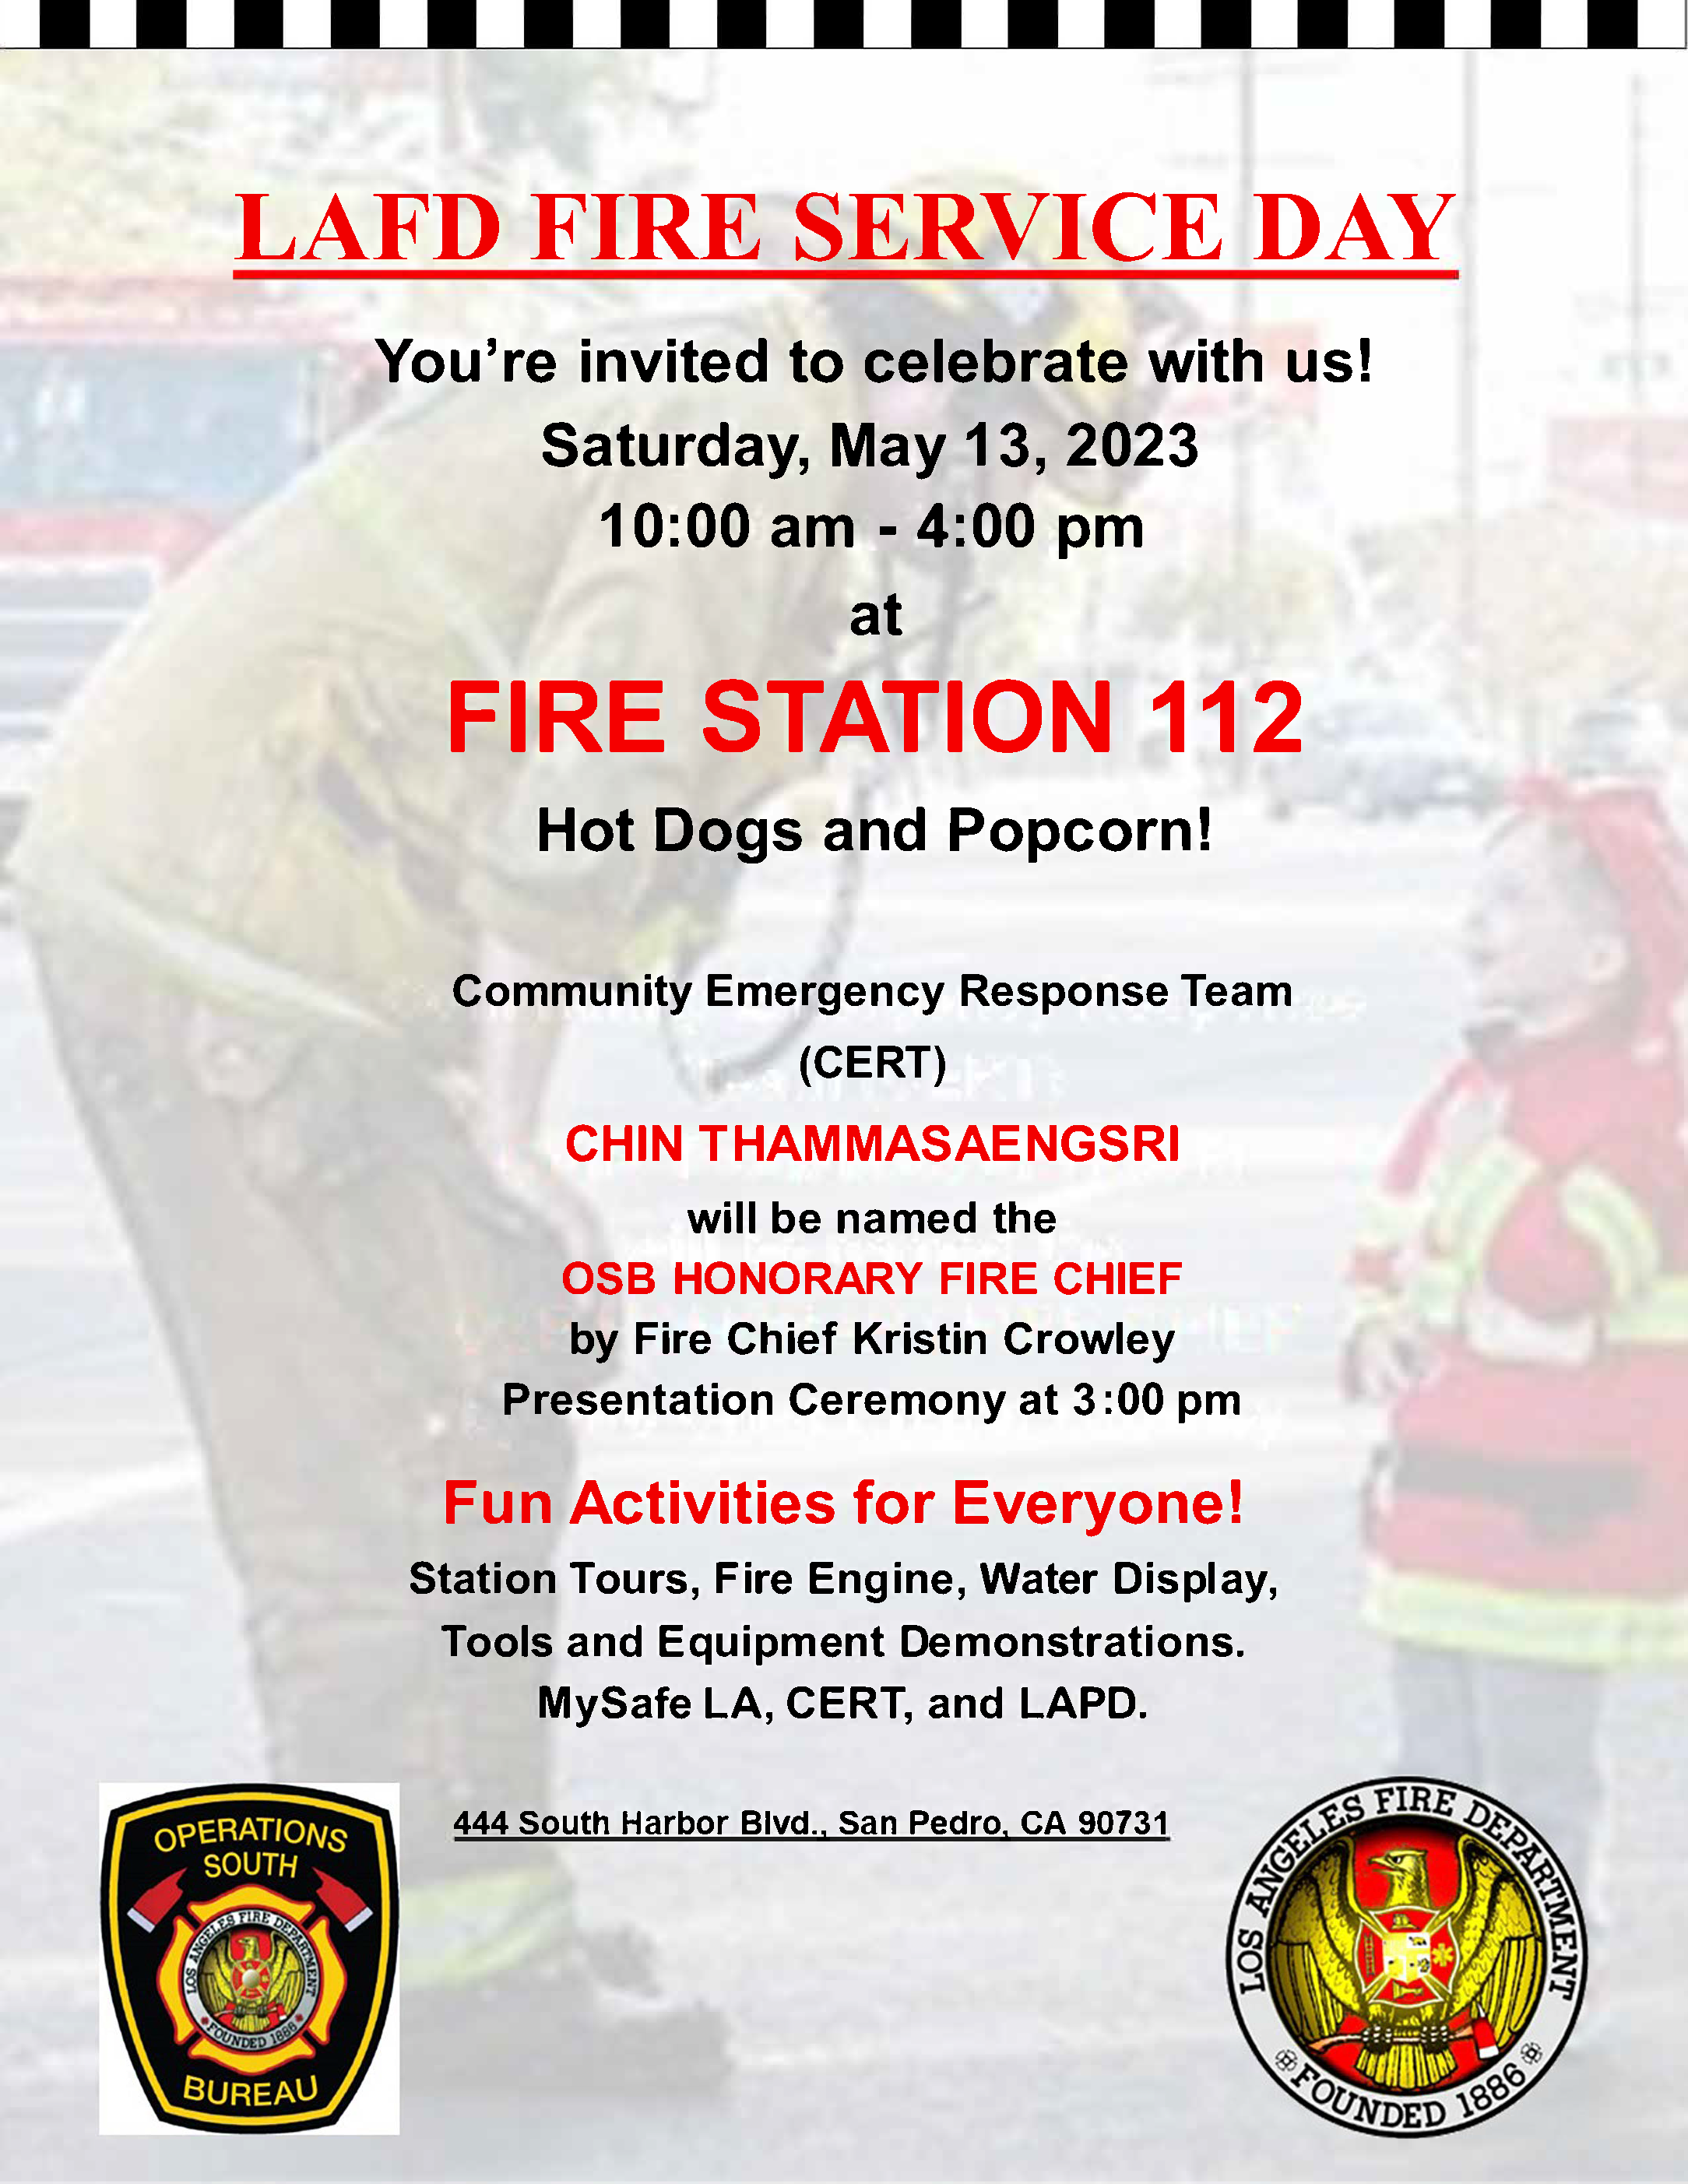 Join Us May 13, 2023 For LAFD 'Fire Service Day' Citywide Open